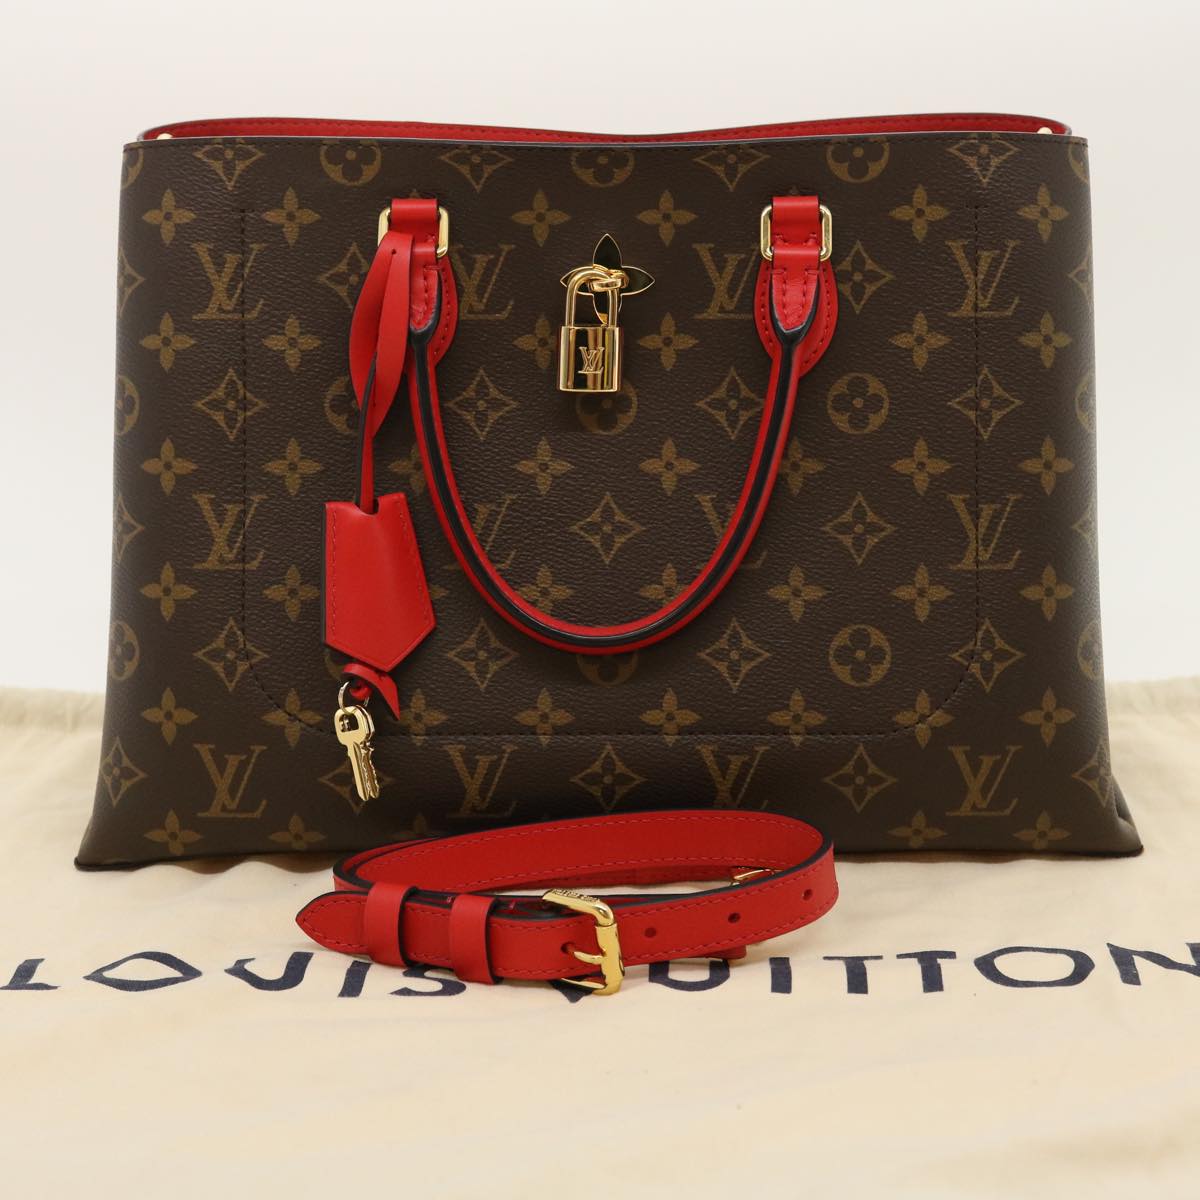 LOUIS VUITTON Monogram Flower Tote Hand Bag Coquelicot 2way M43553 Auth ro306A